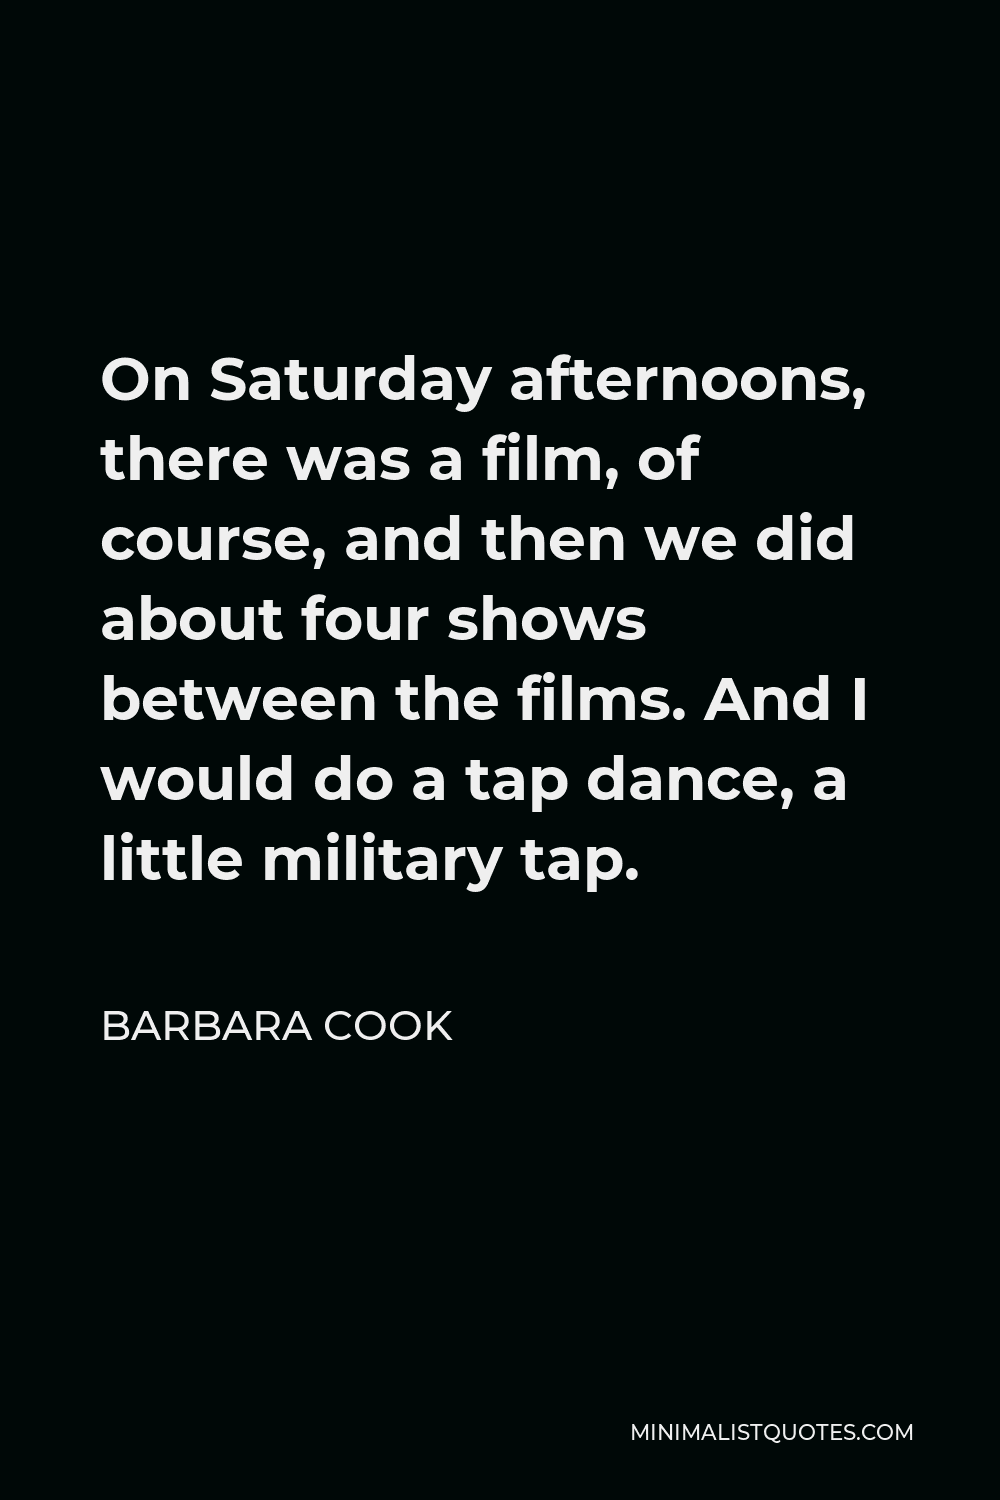 Barbara Cook Quote - On Saturday afternoons, there was a film, of course, and then we did about four shows between the films. And I would do a tap dance, a little military tap.